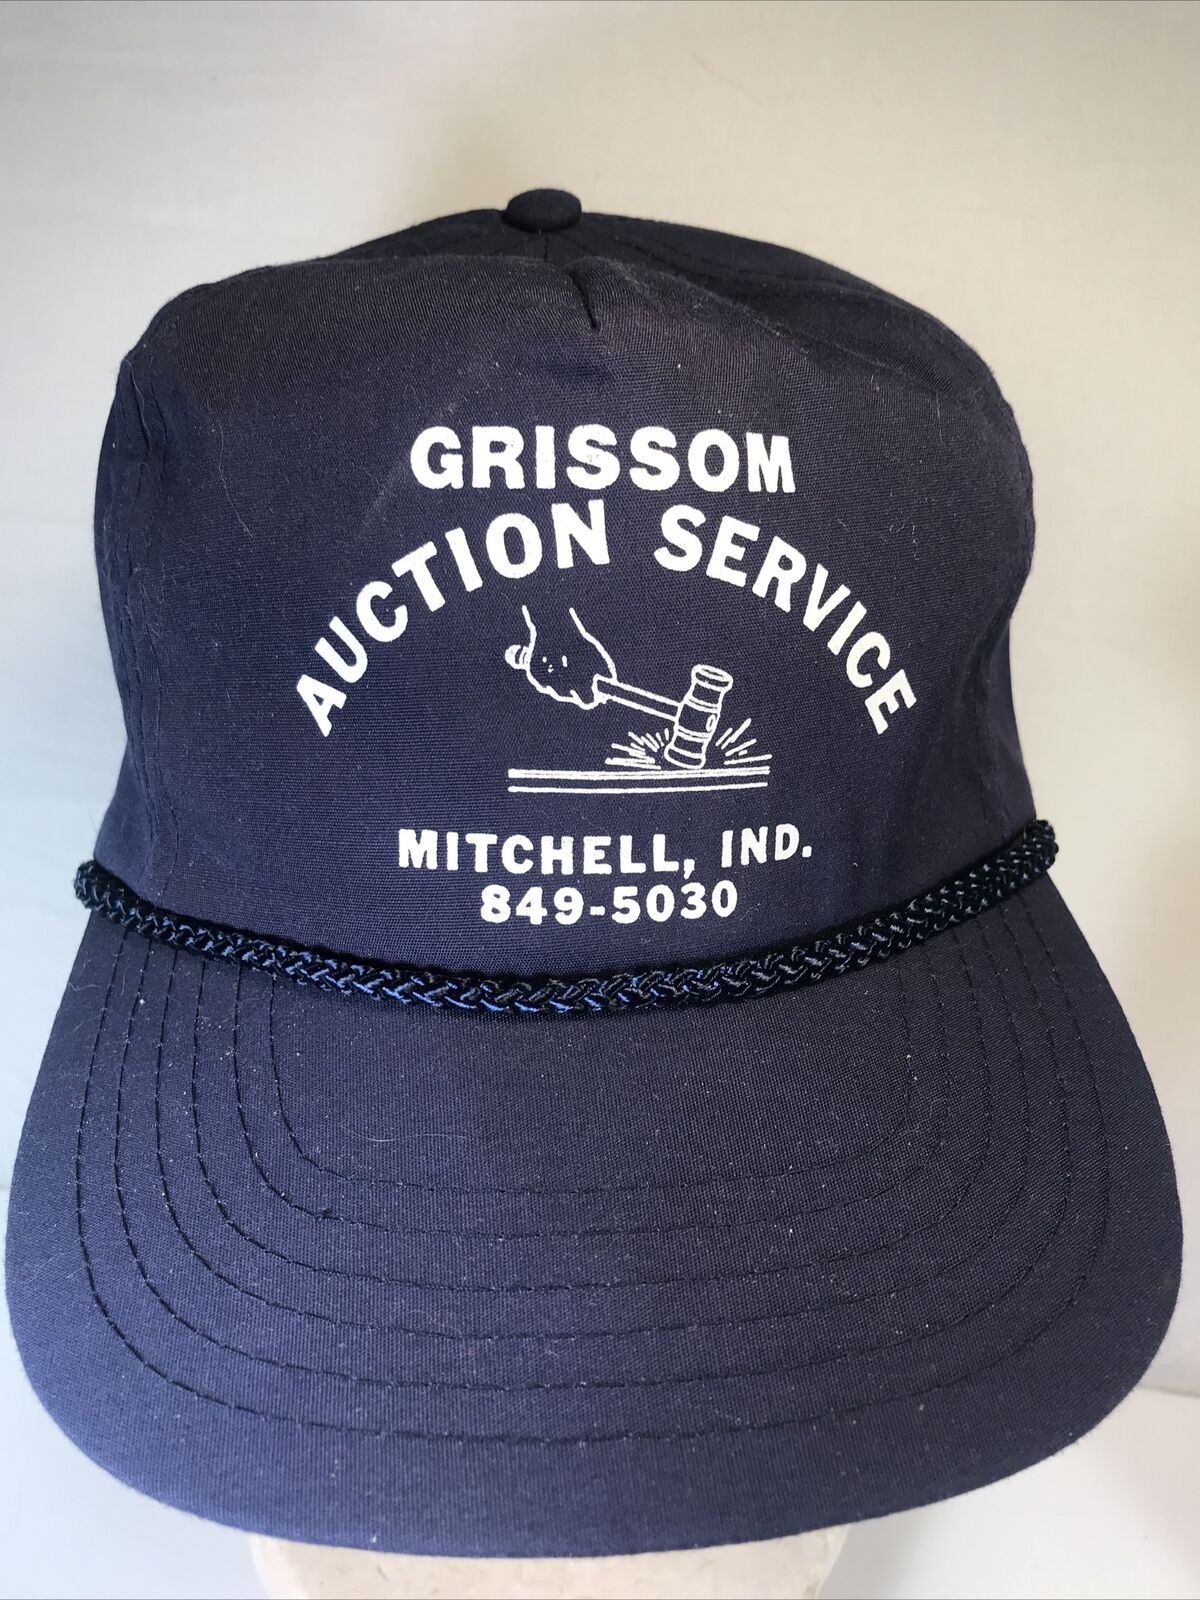 Vintage Grissom Auction Service Otto Cap Mitchell IN (Home of Gus Grissom) READ